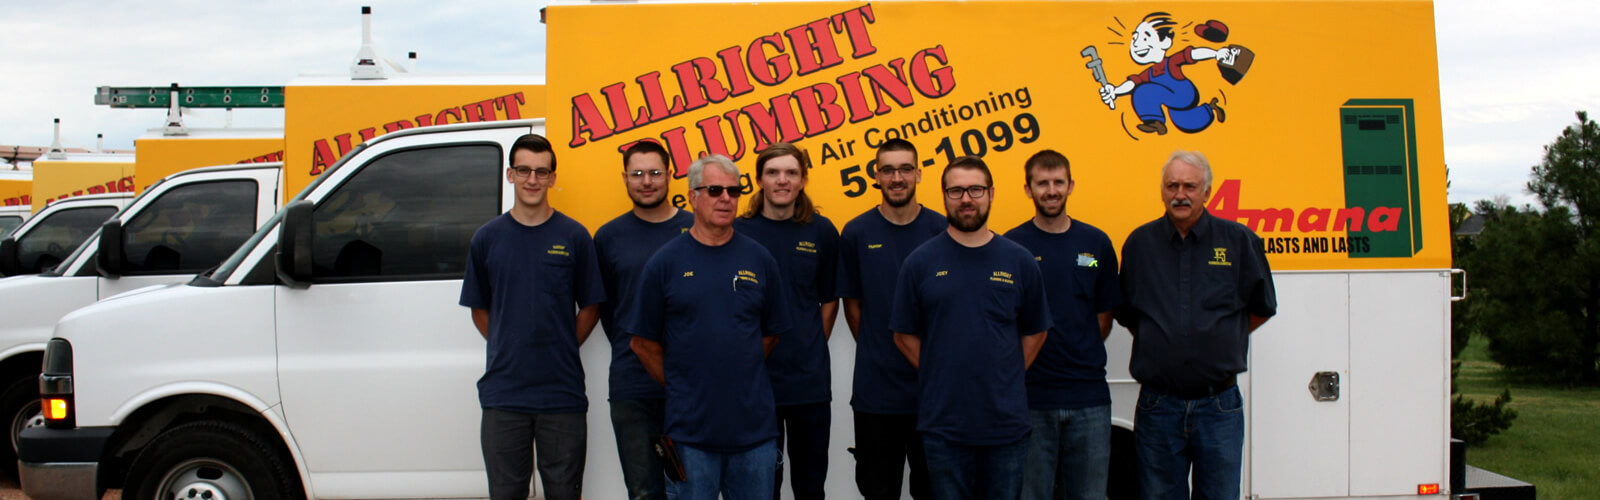 Allright Plumbing & Heating Technicians standing in front of company truck